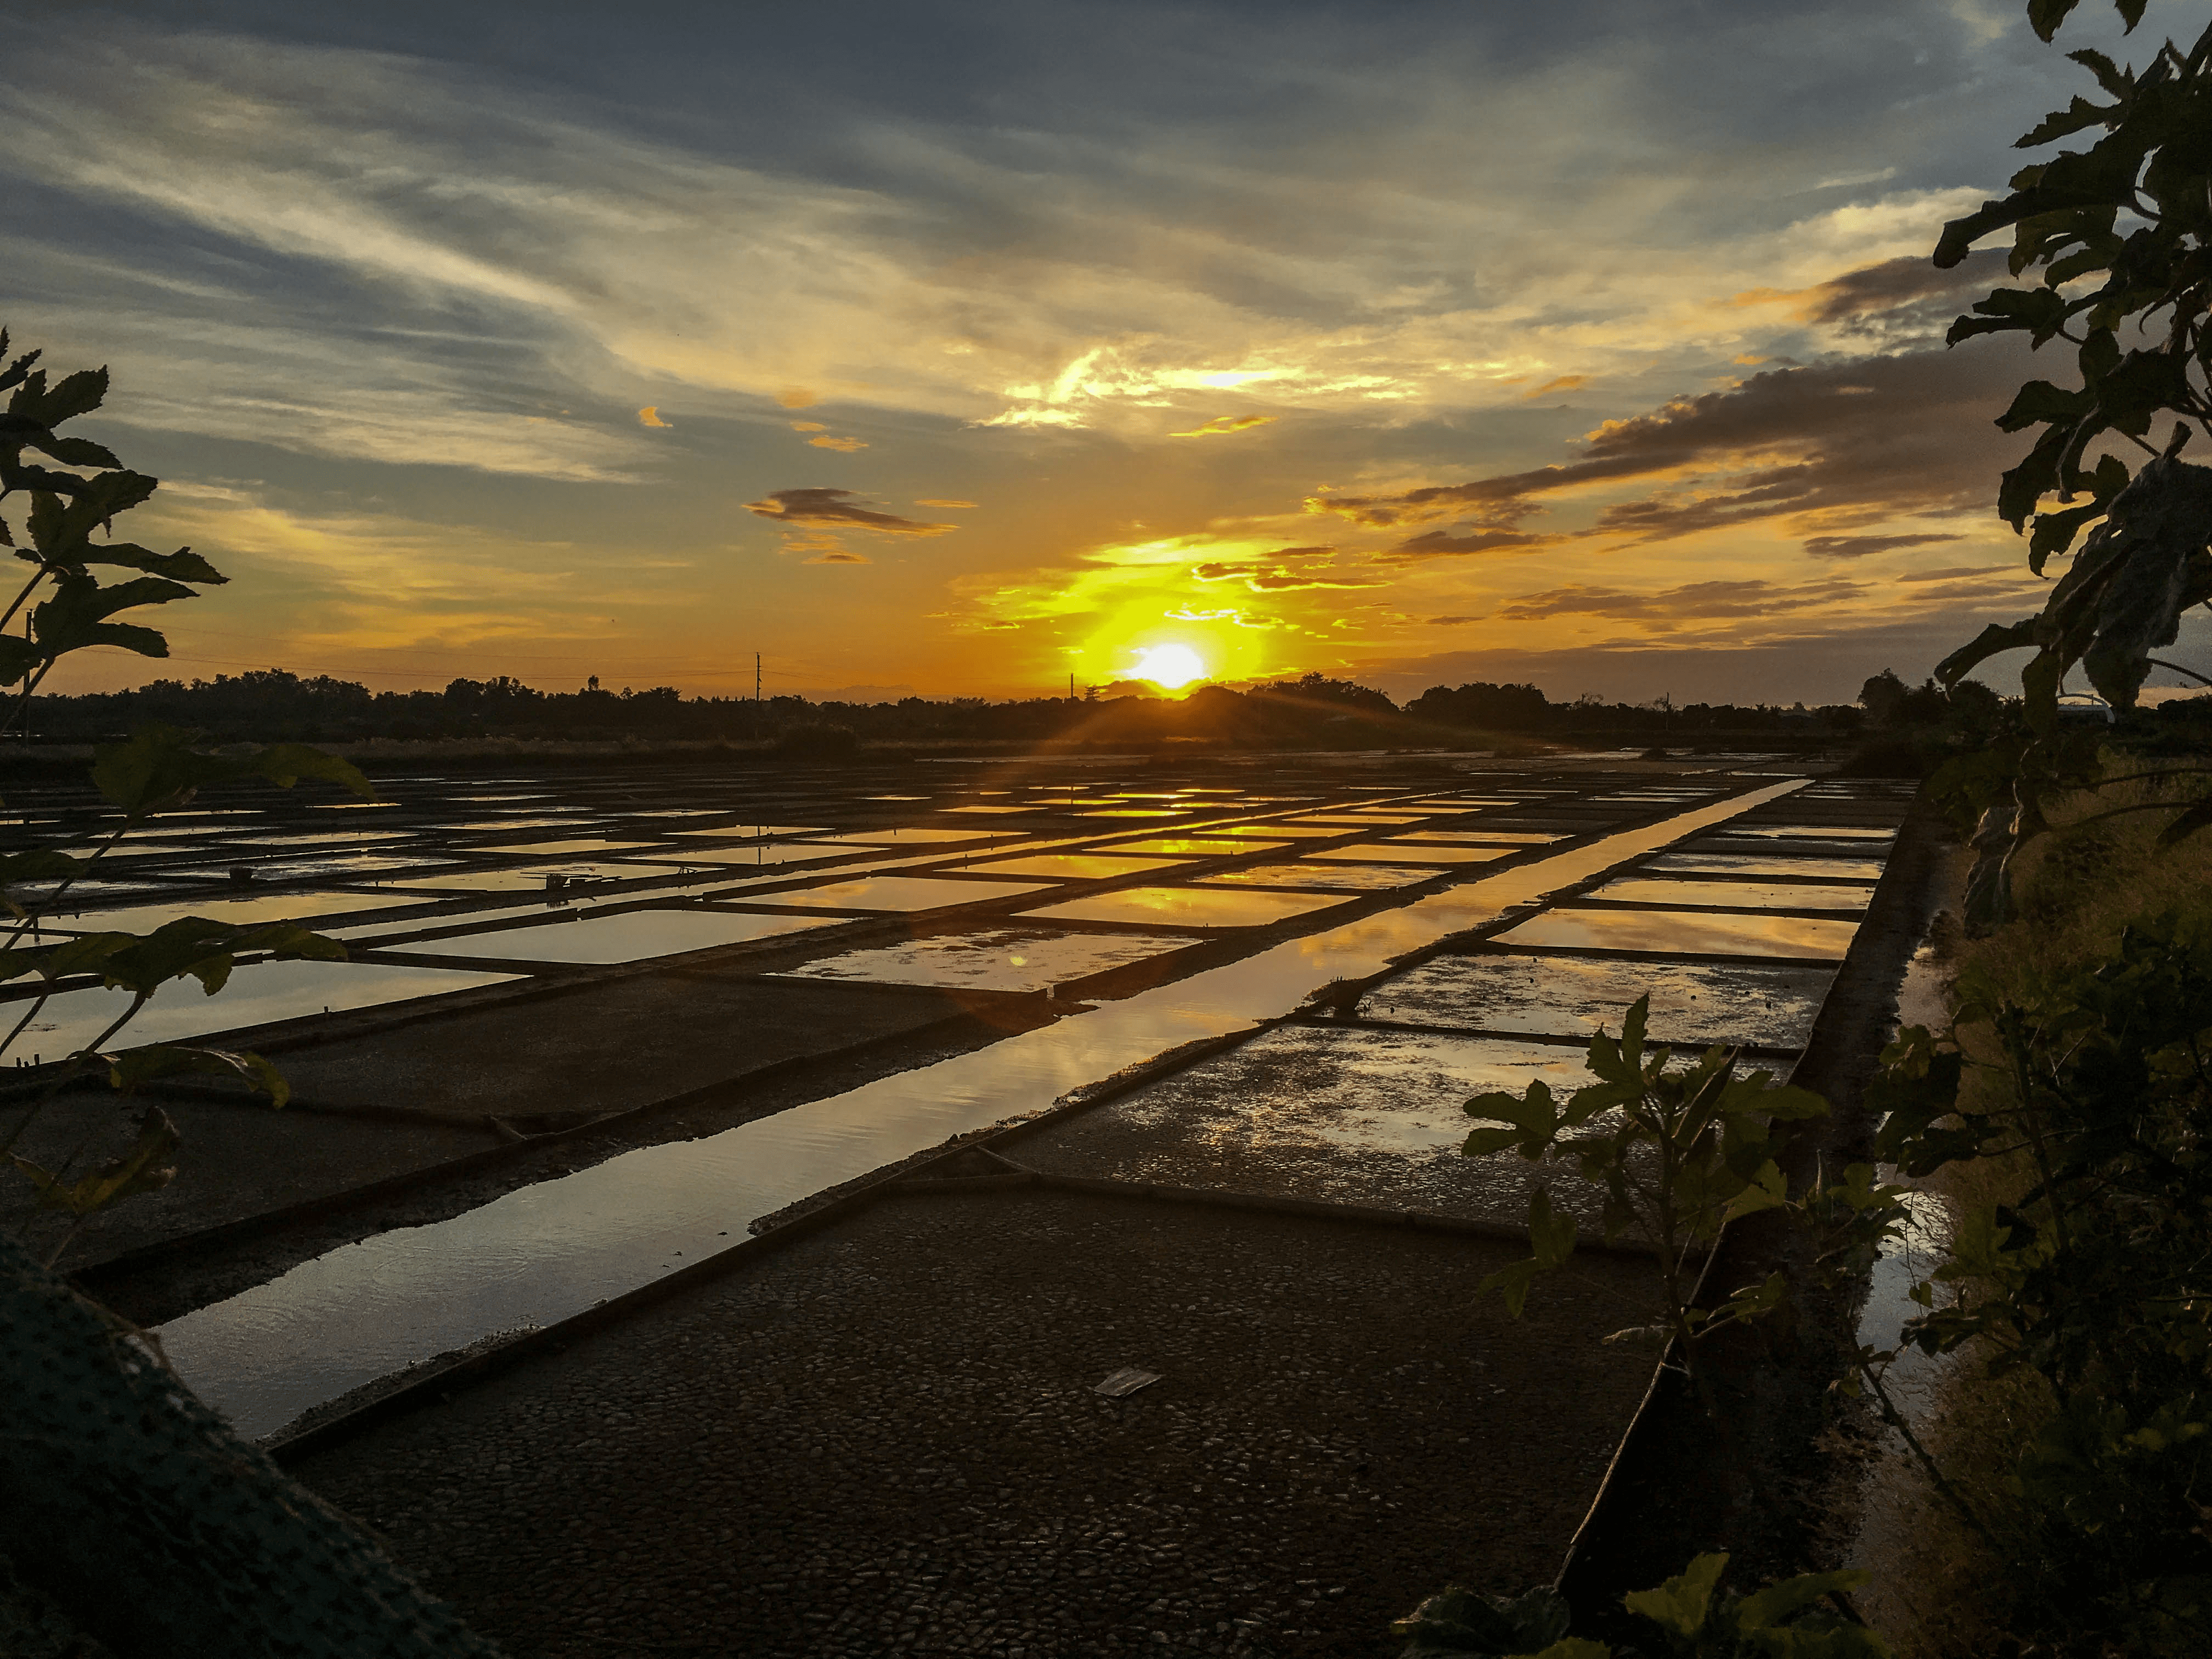 salt farm at sunset at hundred islands alternate welcome center mangrove park in pangasinan philippines